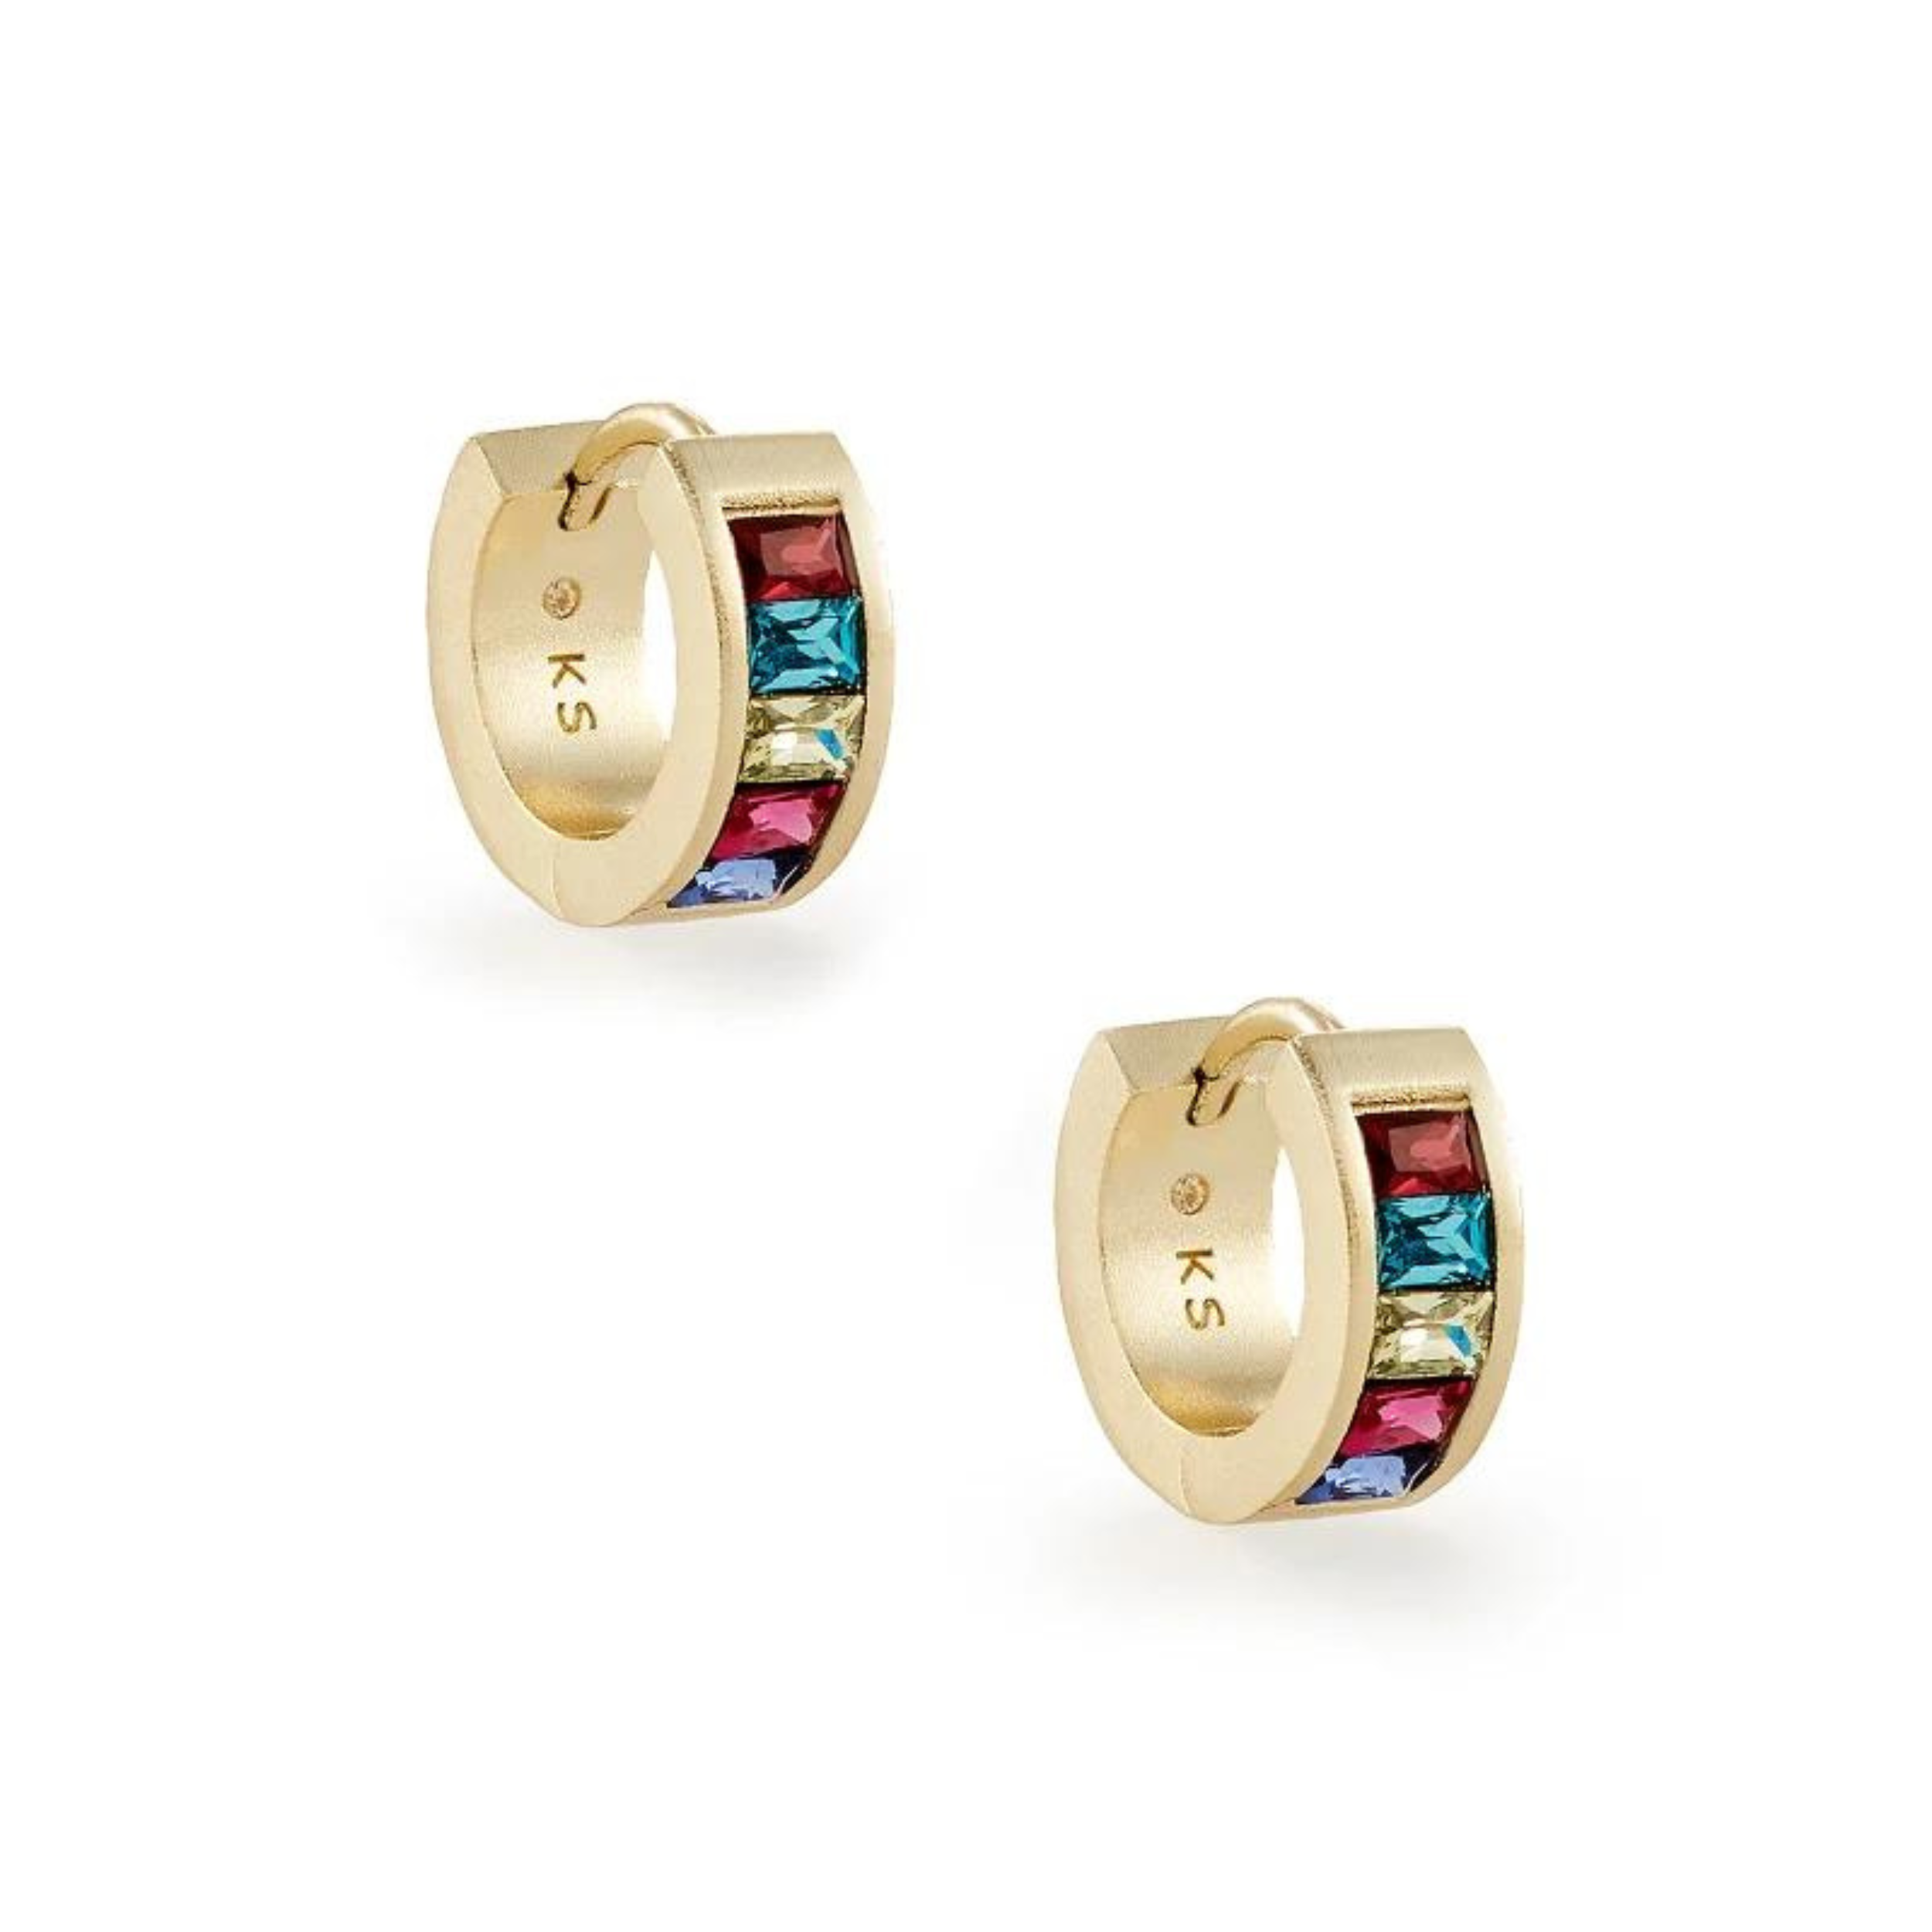 Gold huggie earrings with multicolored crystals, pictured on a white background.